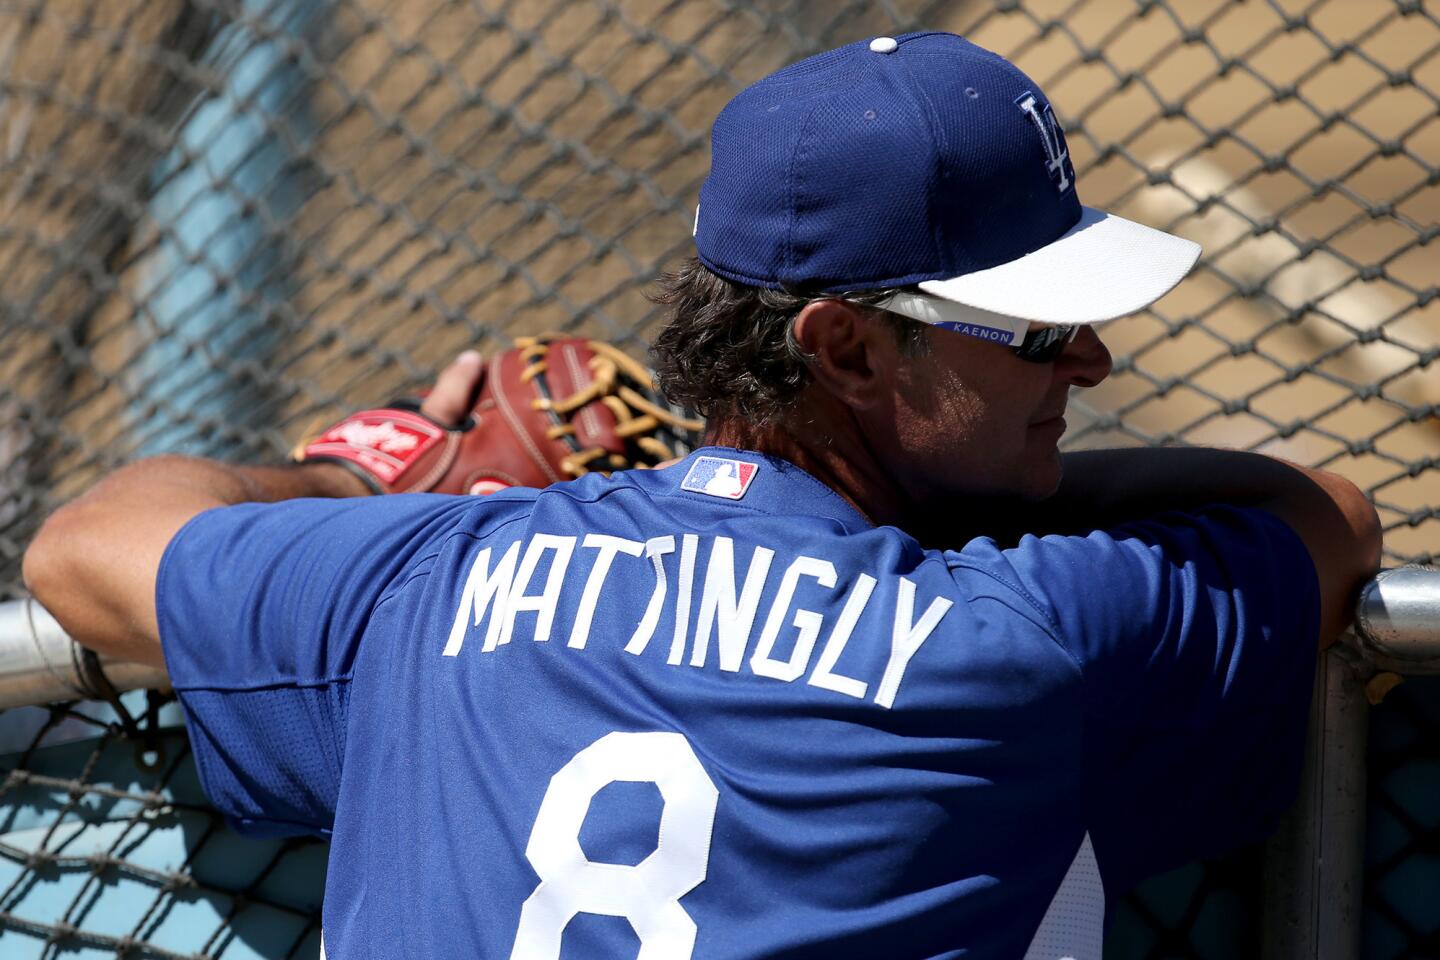 Toronto Blue Jays 2023: Who did Don Mattingly replace?